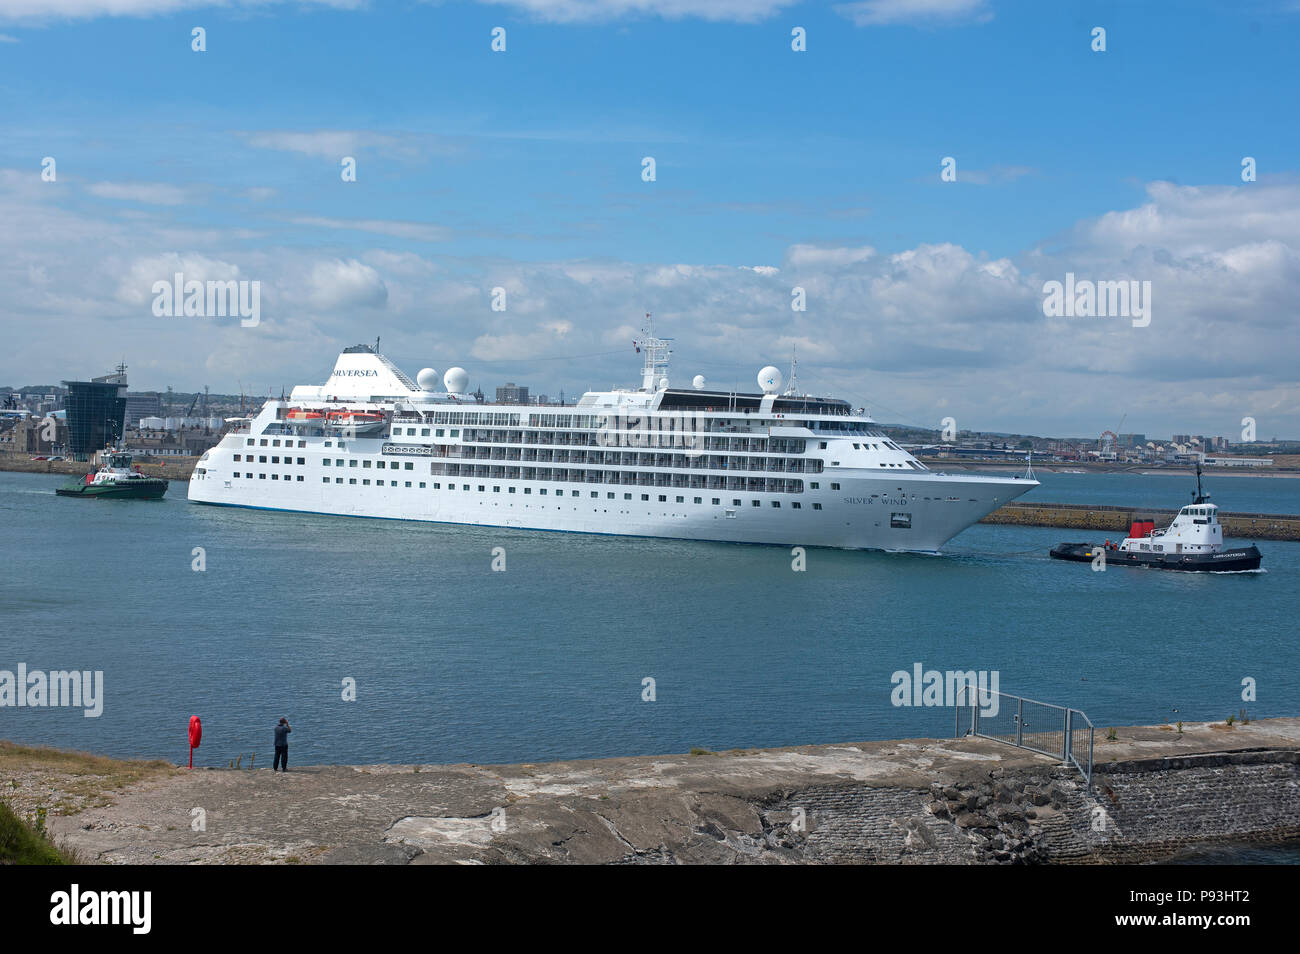 Leaving Aberdeen Harbour inn Grampian Region, Scotland, the Silver Wind Cruise Ship is about to depart for the Tilbury Docks in London. Stock Photo